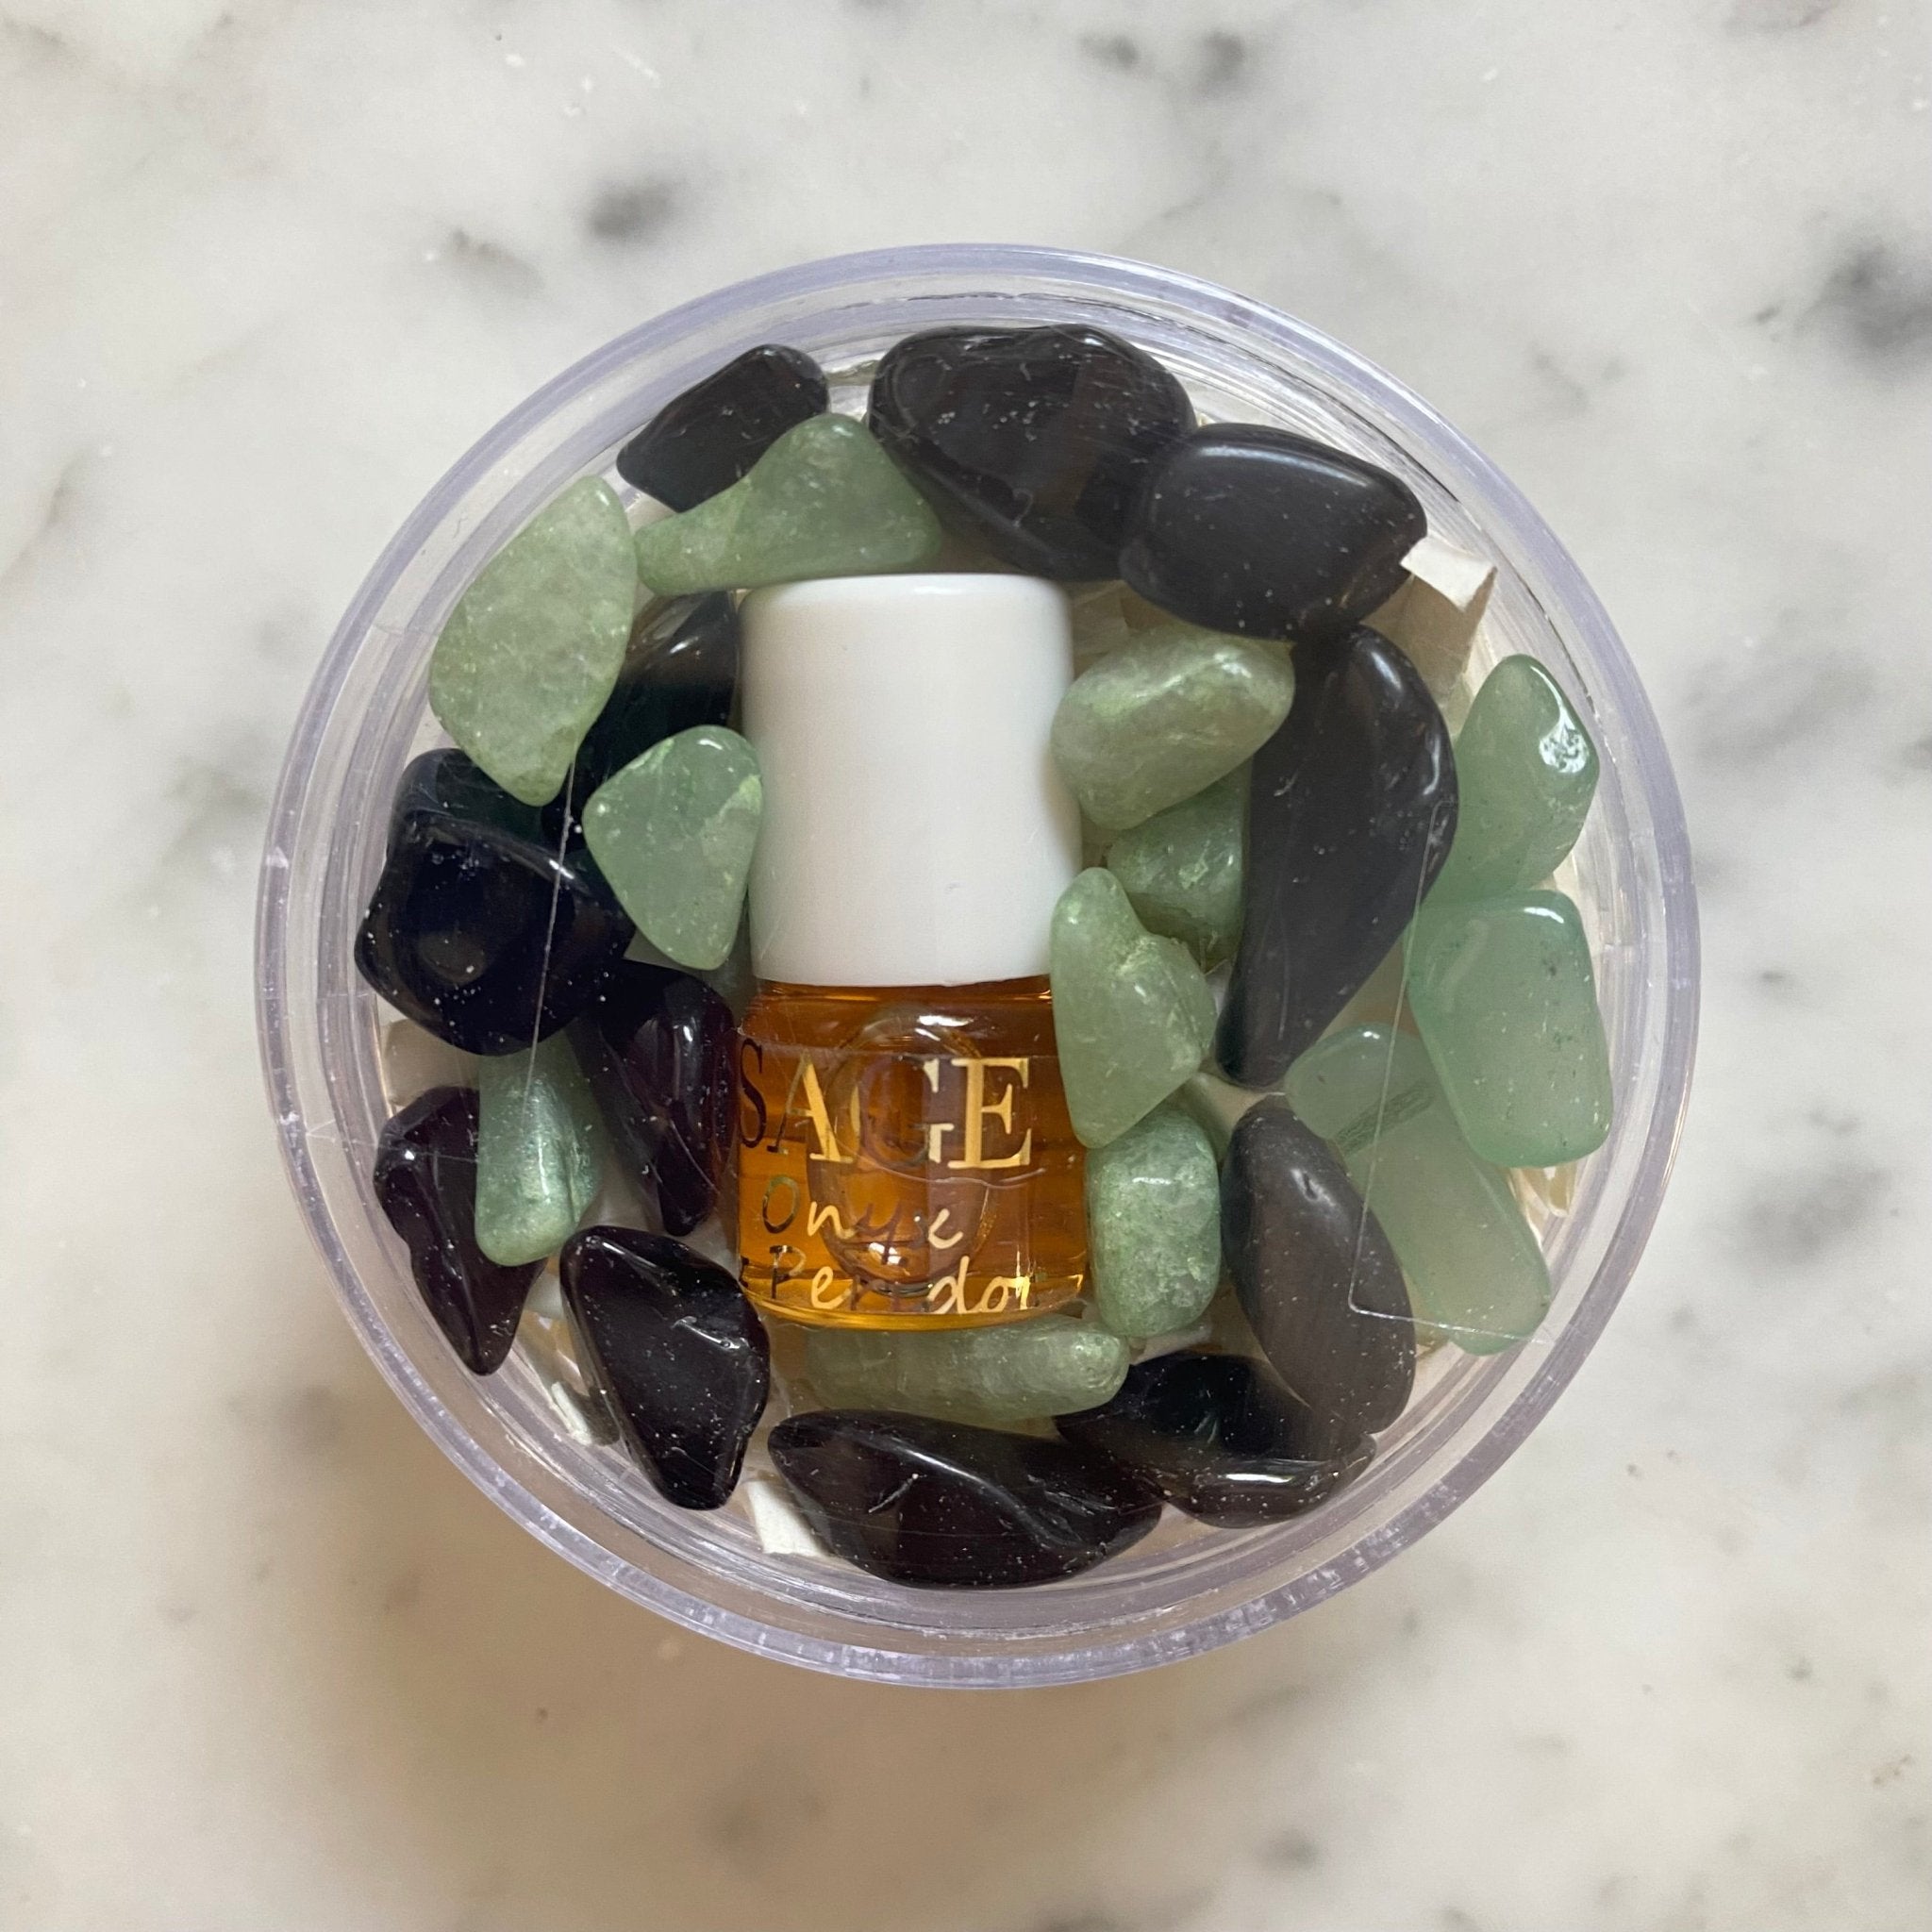 Onyx &amp; Peridot Blend Perfume Oil Concentrate Mini Rollie with Gemstones by Sage - The Sage Lifestyle